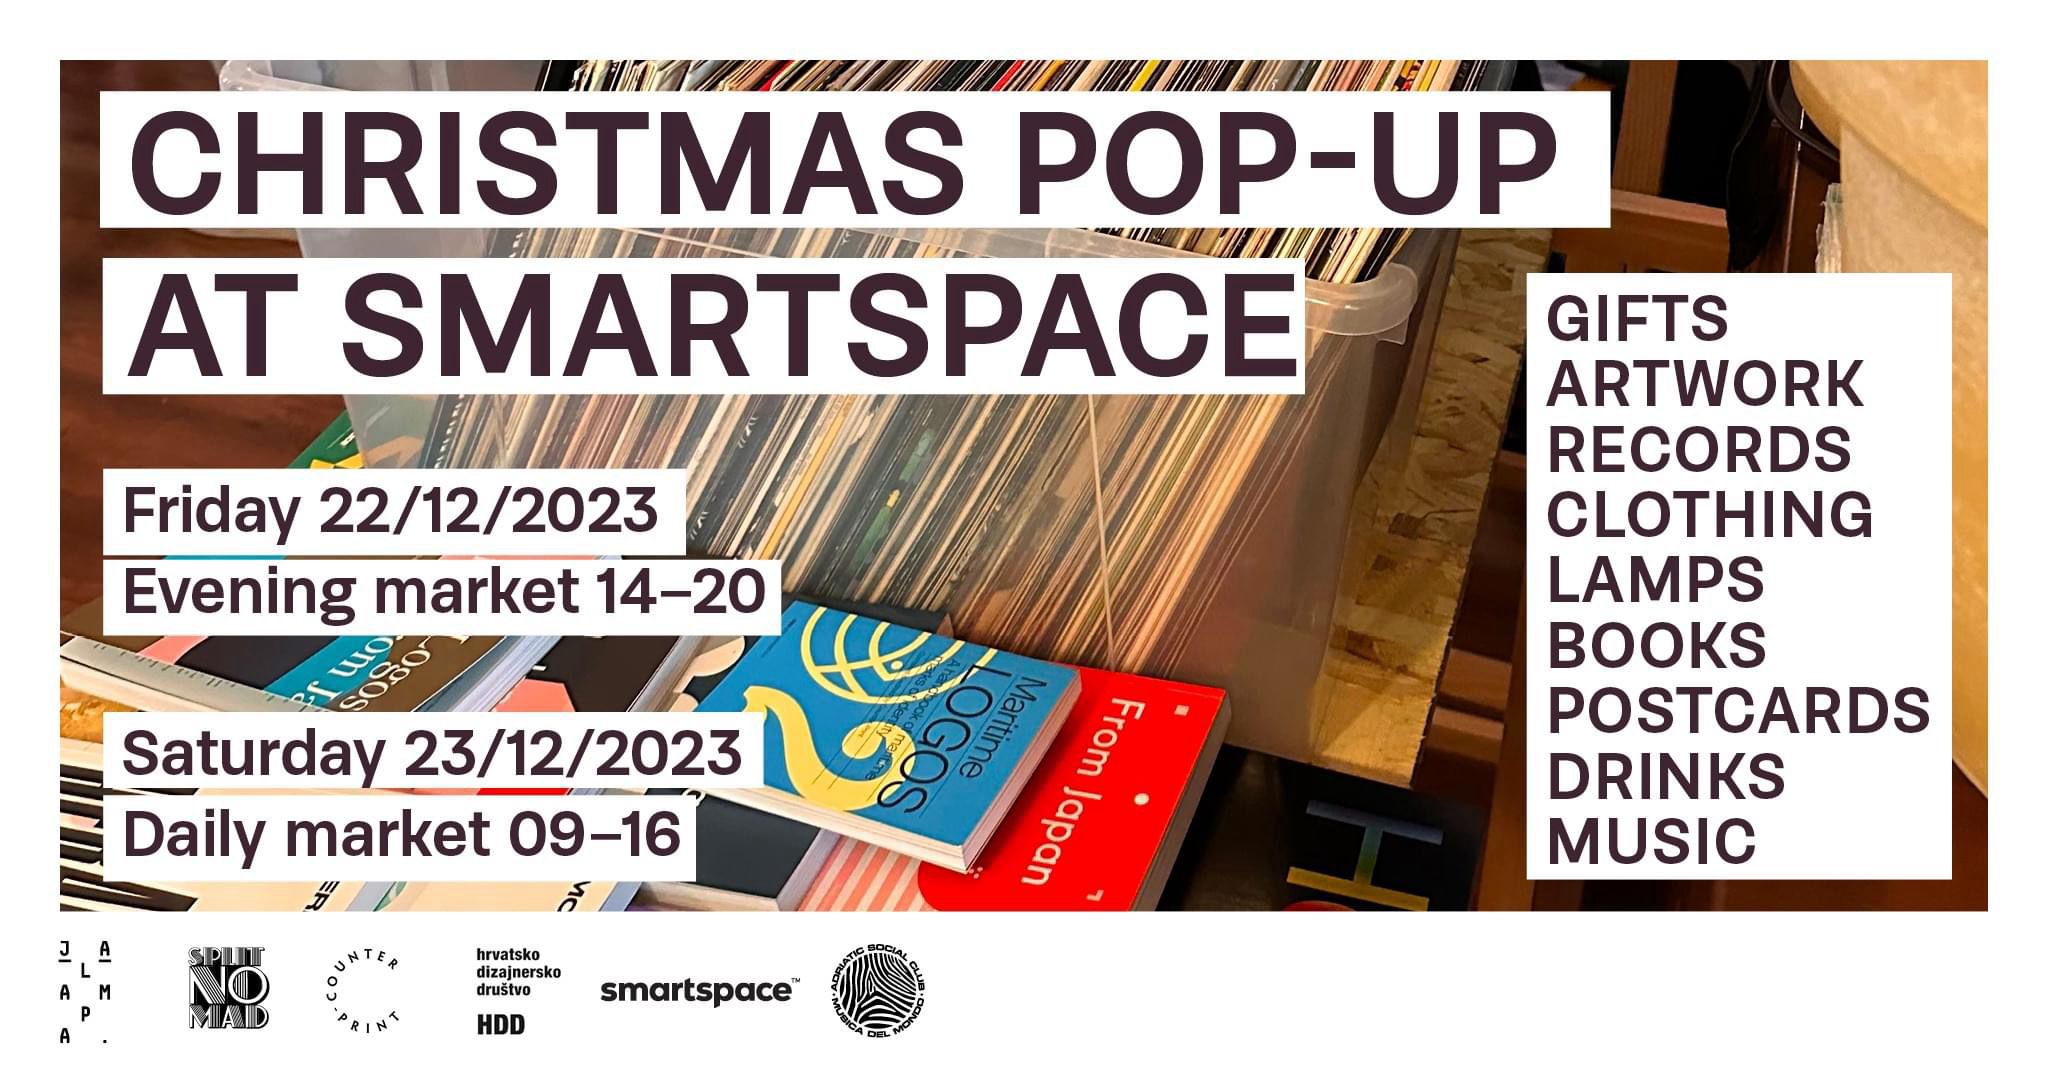 CHRISTMAS POP-UP AT SMARTSPACE